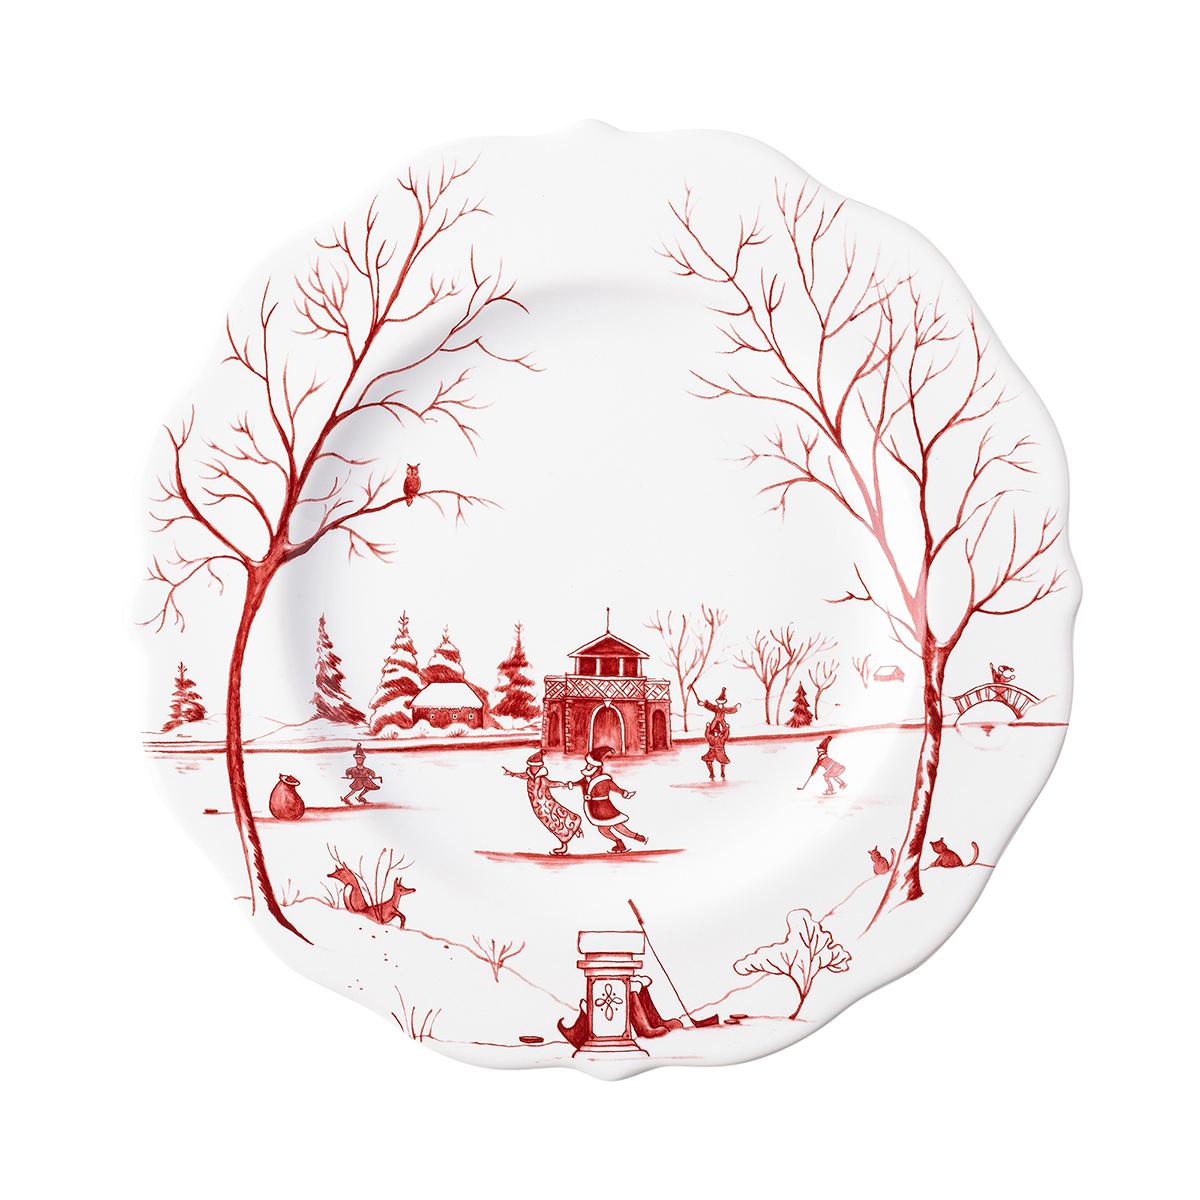 Country Estate Winter Frolic "Mr. & Mrs. Claus" "Christmas Day" Ruby Dessert/Salad Plate